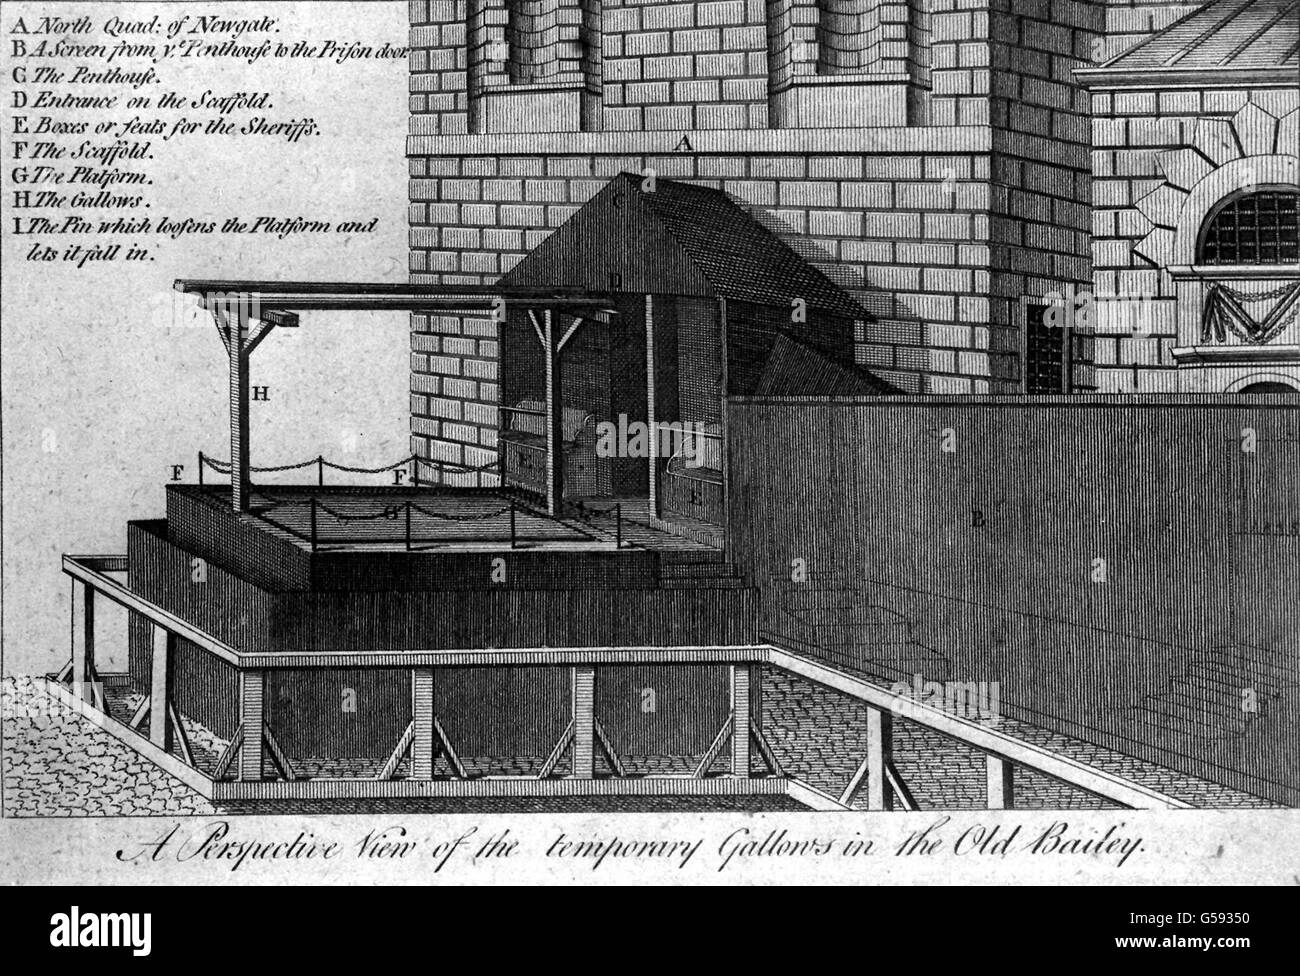 THE GALLOWS: An 18th century engraving depicting a temporary gallows at the Old Bailey, London. Stock Photo